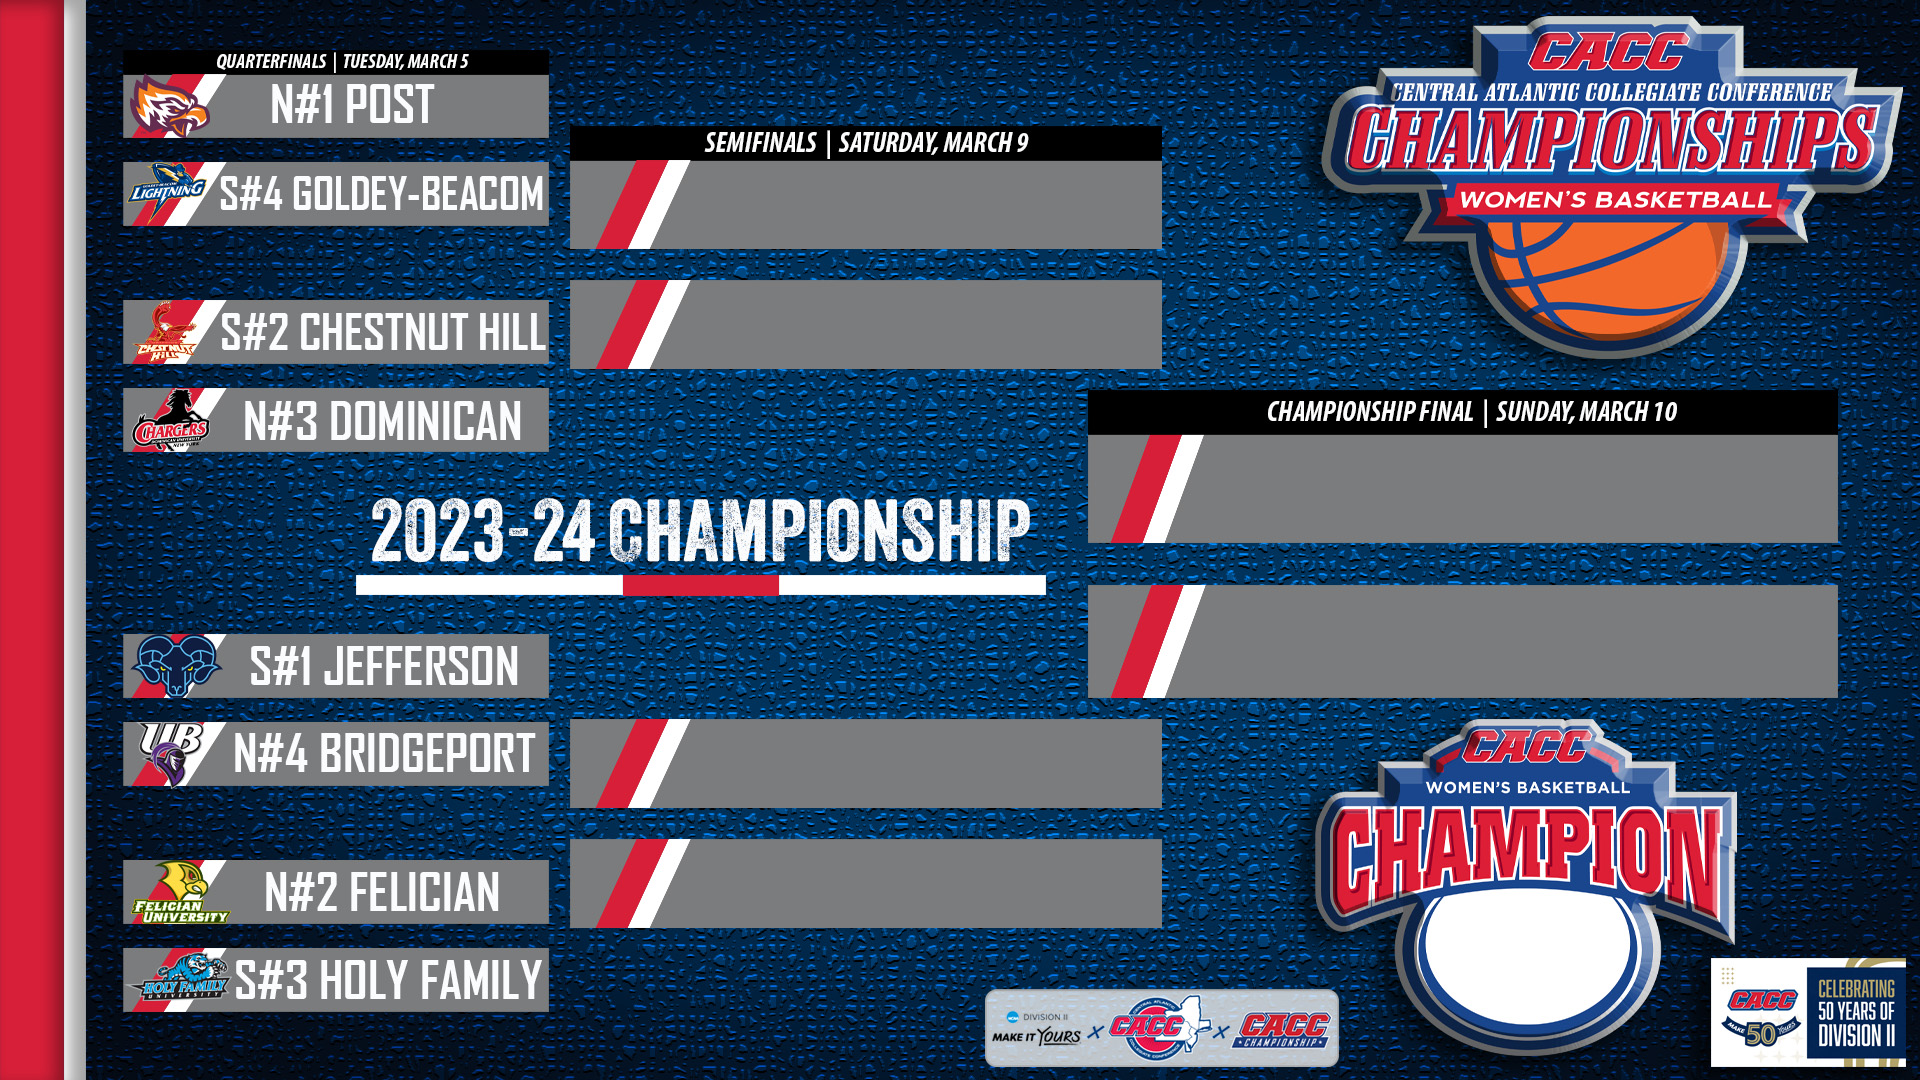 2023-24 CACC WOMEN'S BASKETBALL CHAMPIONSHIP CENTRAL